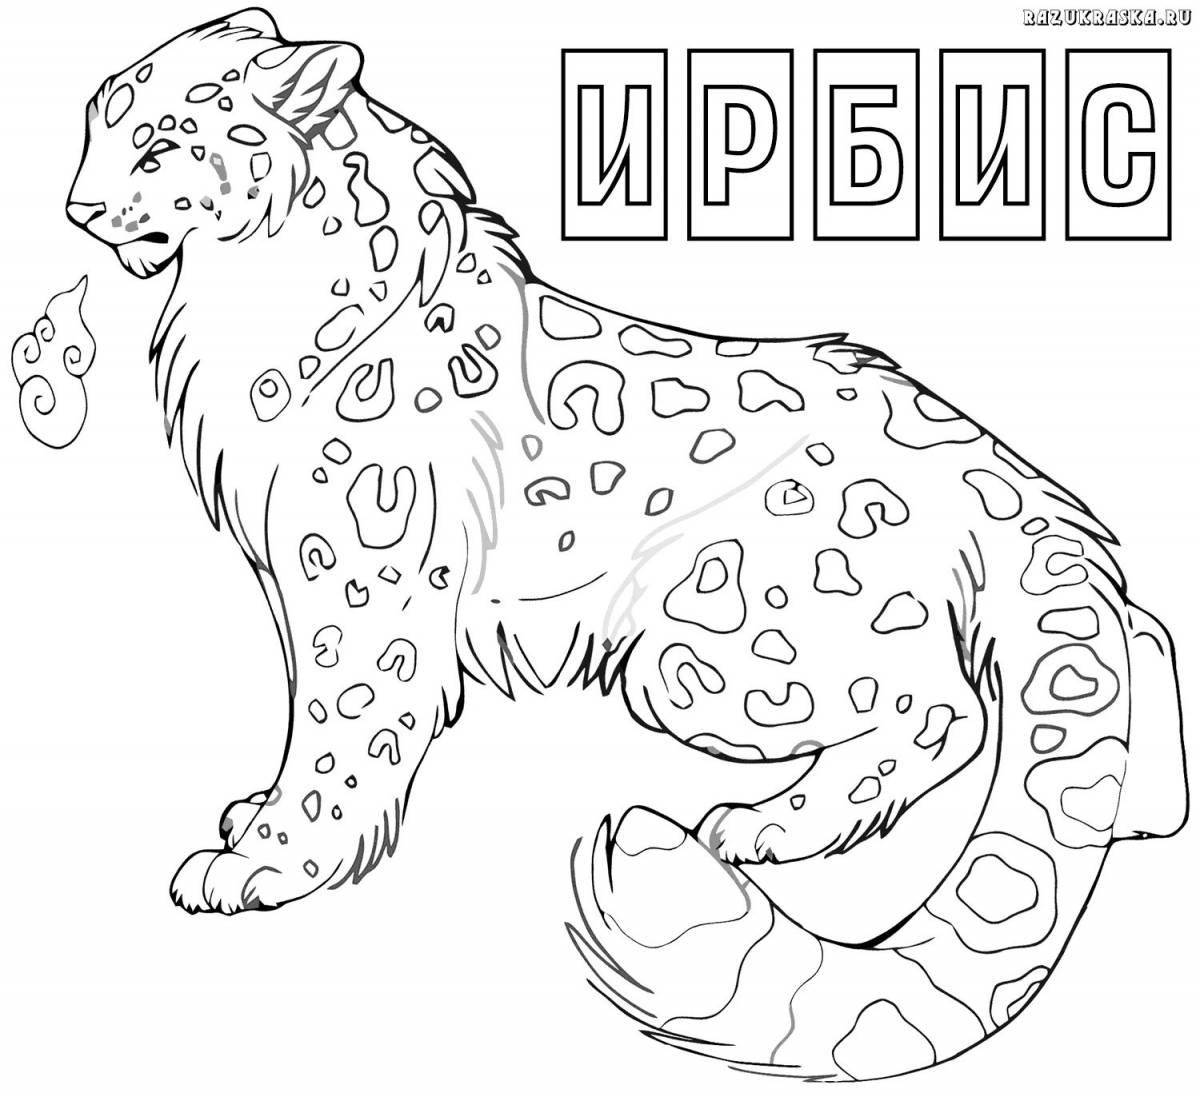 Coloring-journey barys coloring page